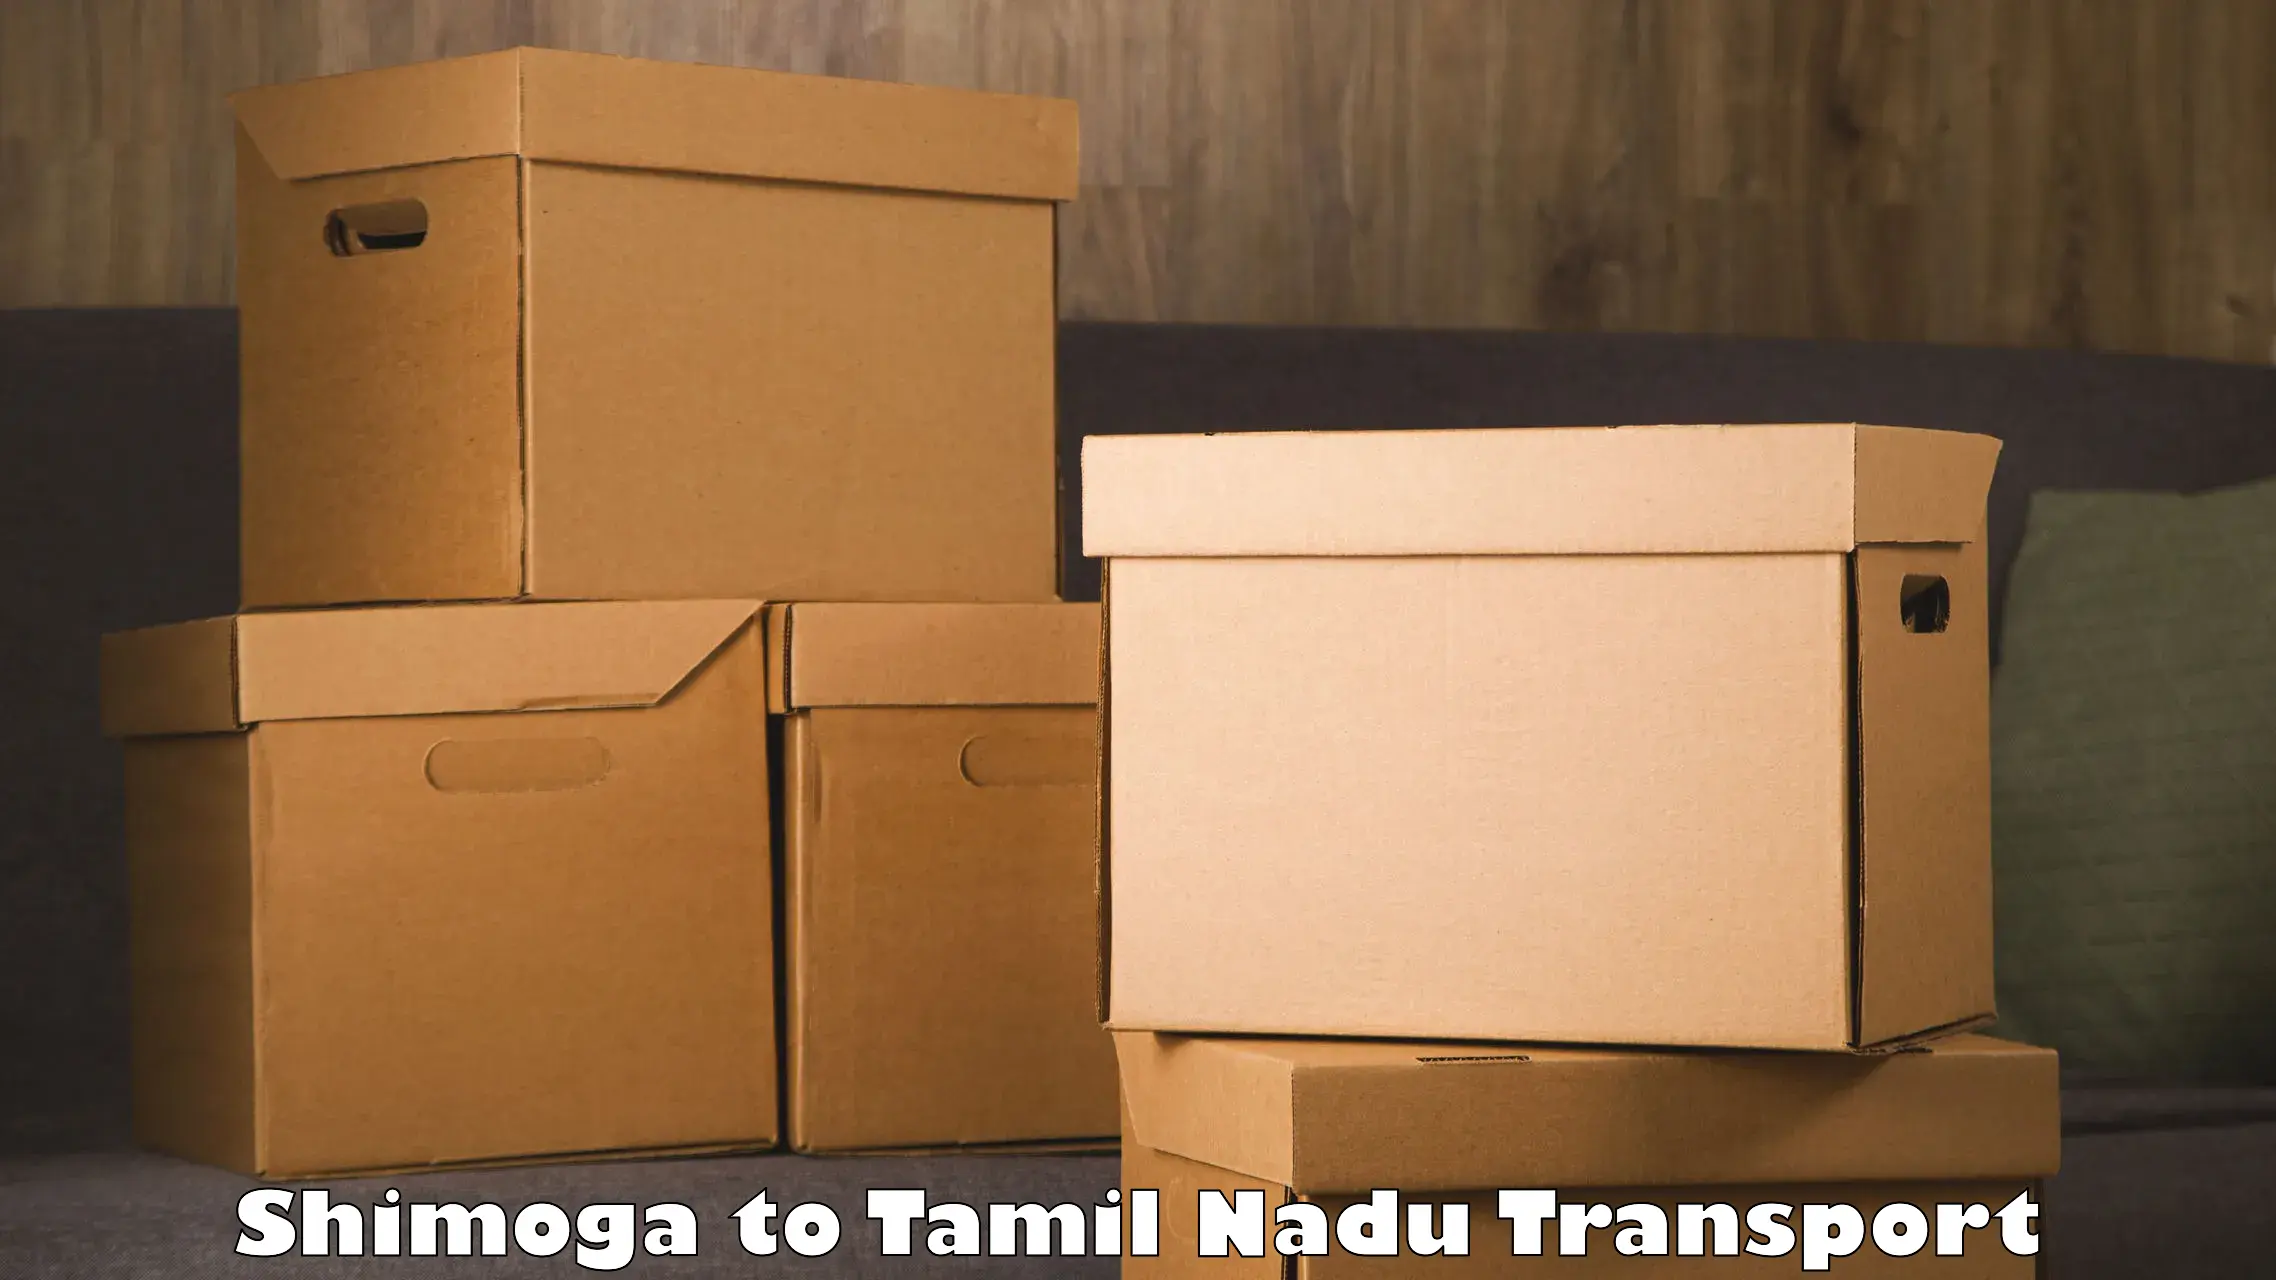 Commercial transport service Shimoga to Coimbatore